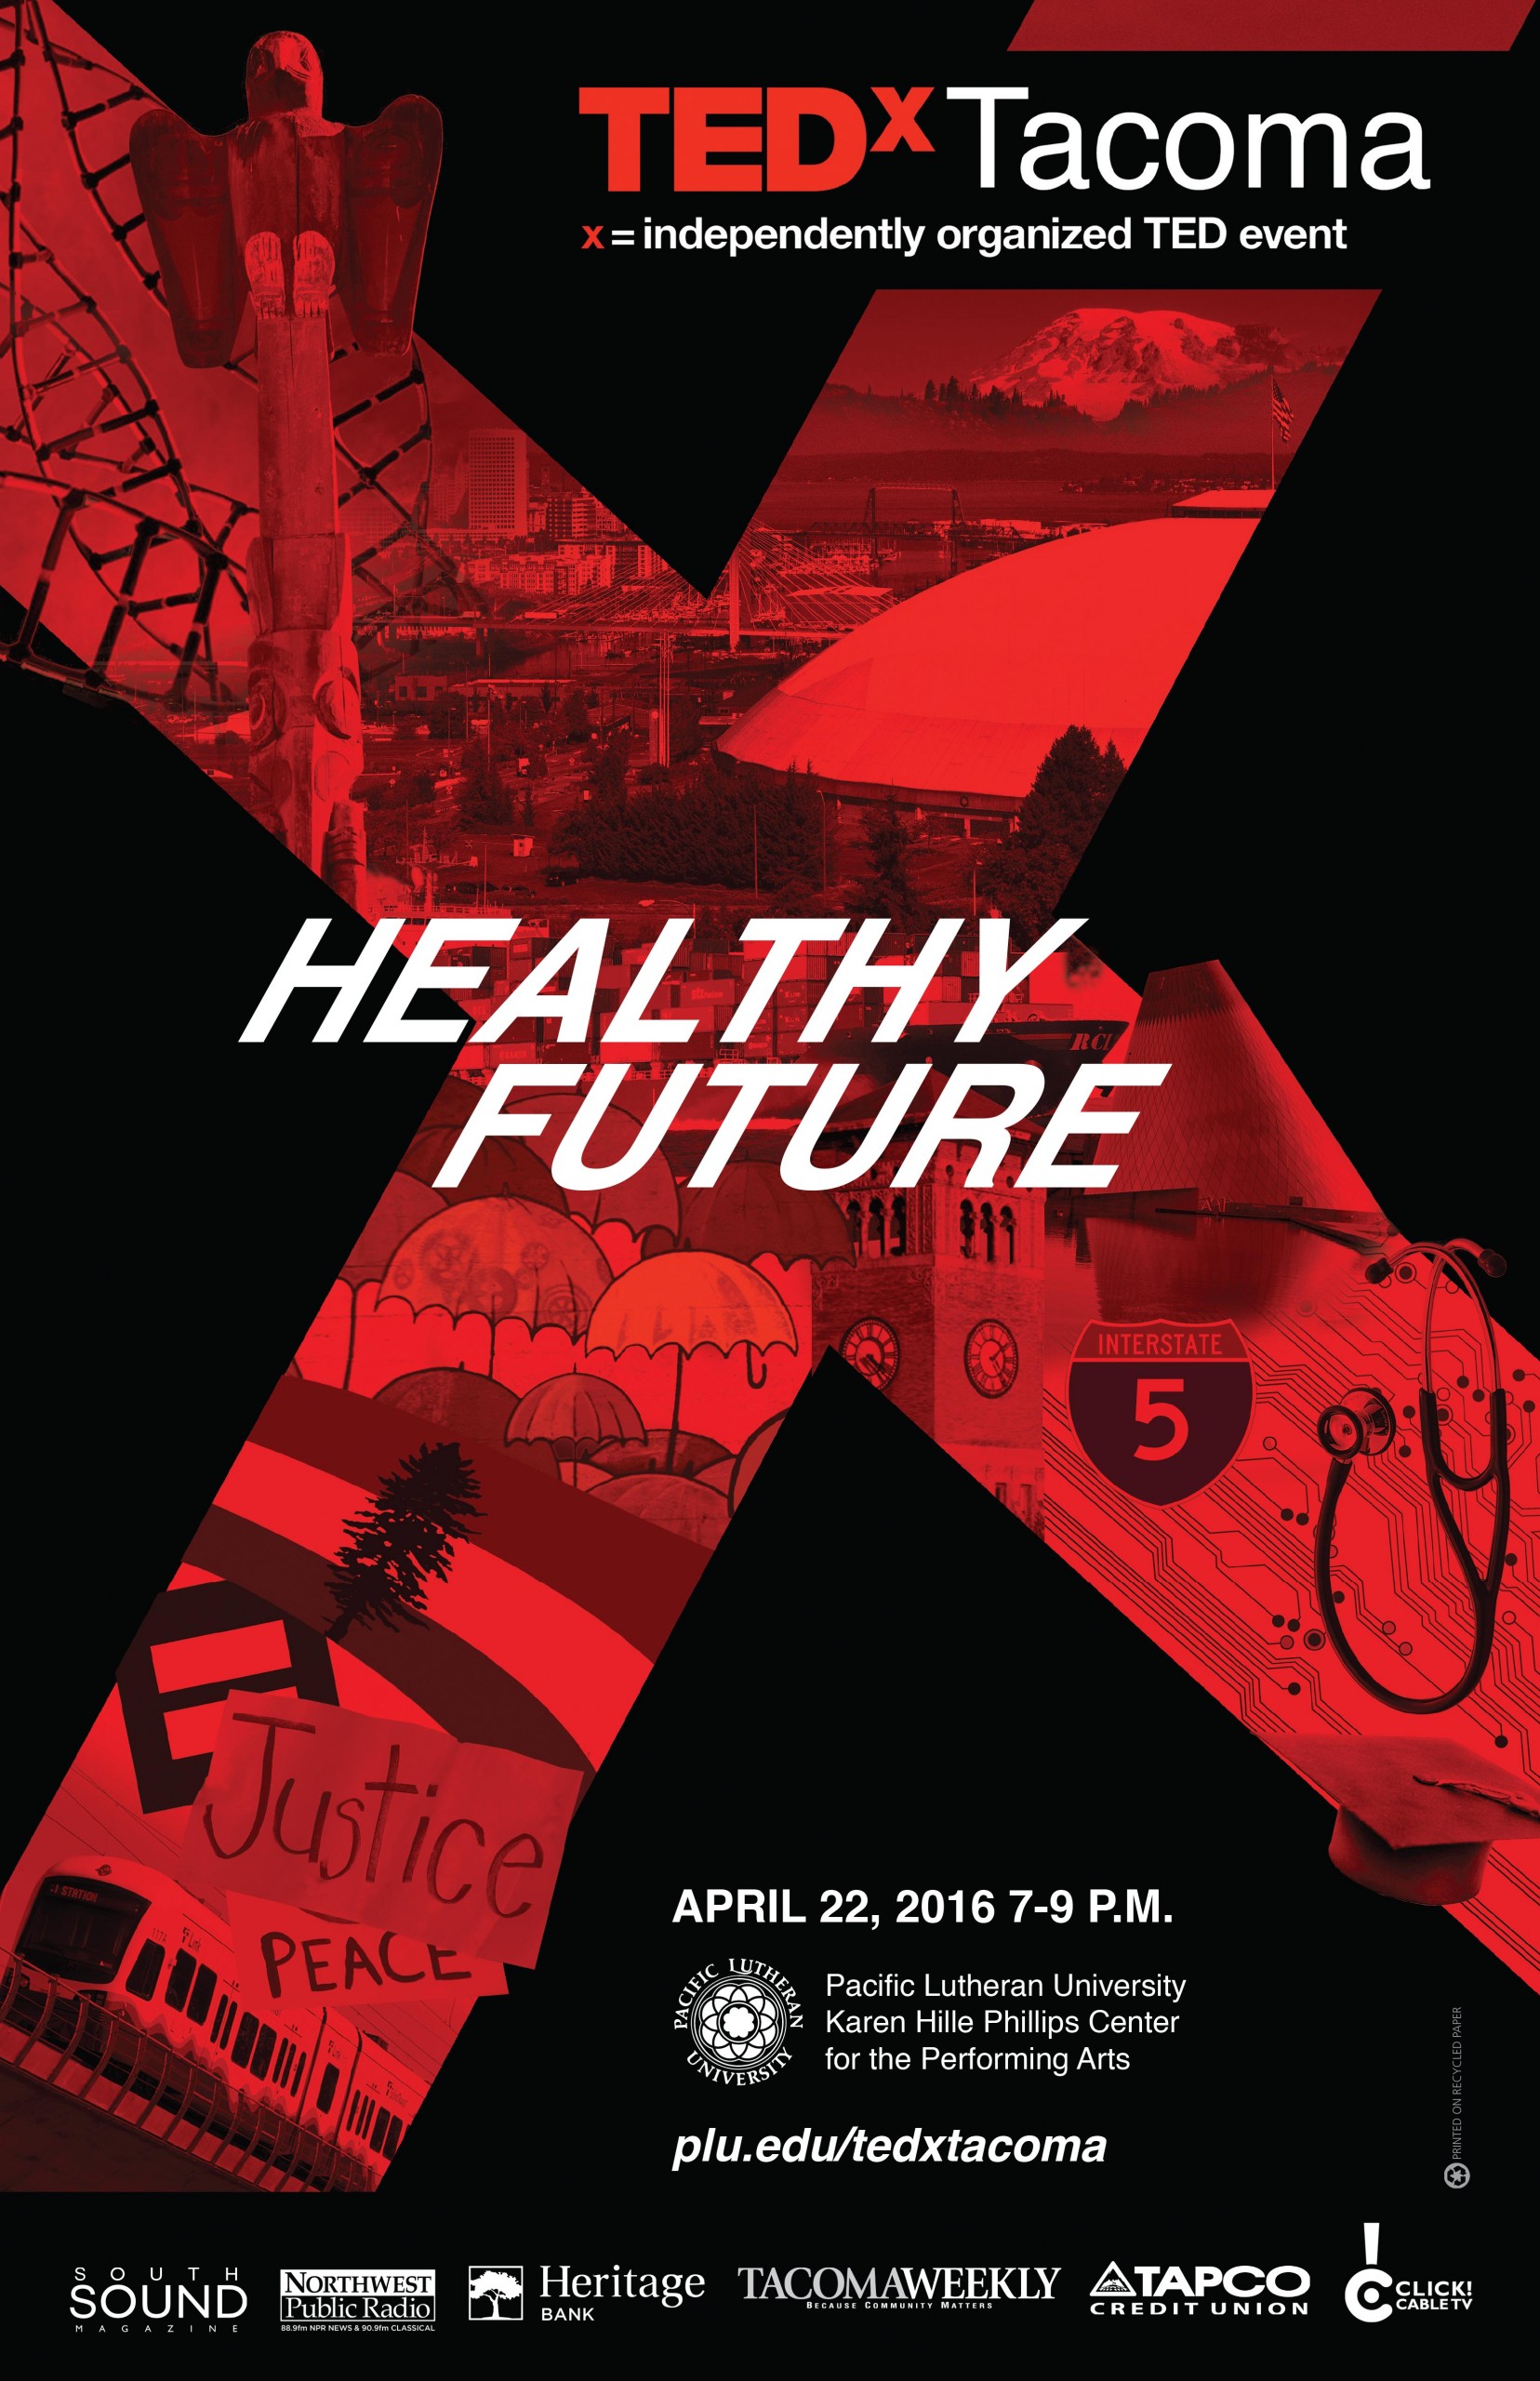 TEDxTacoma 2016 official poster - Healthy Future April 22, 2016 7-9pm PLU Karen Hille Phillips Center for the Performing Arts